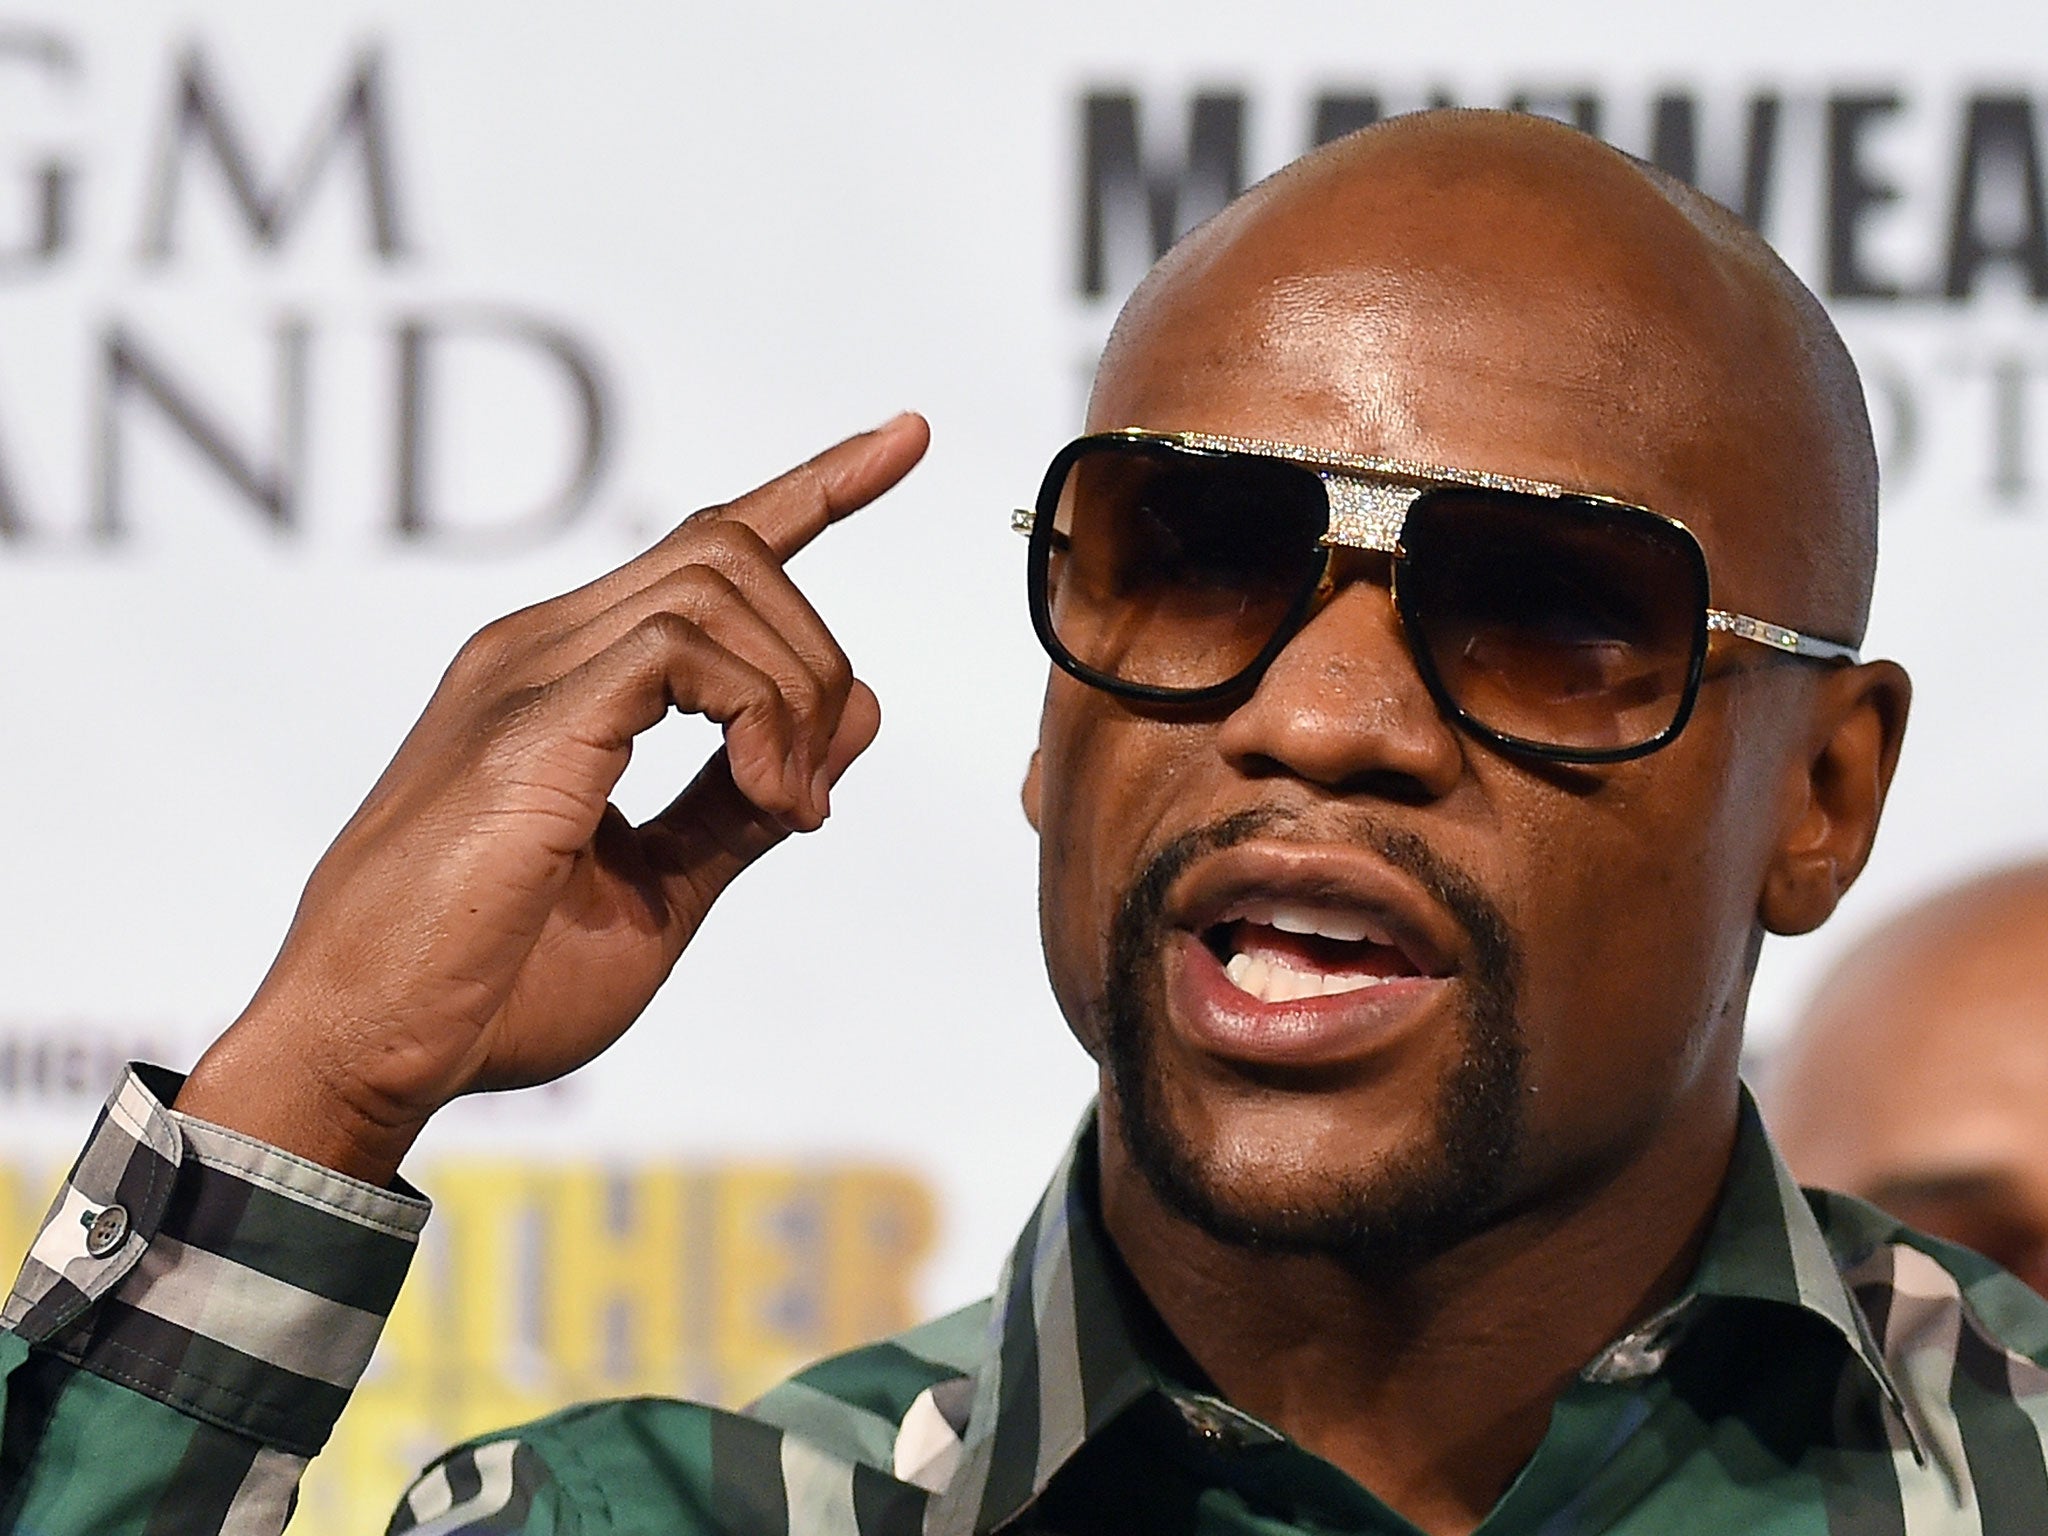 Floyd Mayweather has explained why he snubbed Amir Khan and Kell Brook